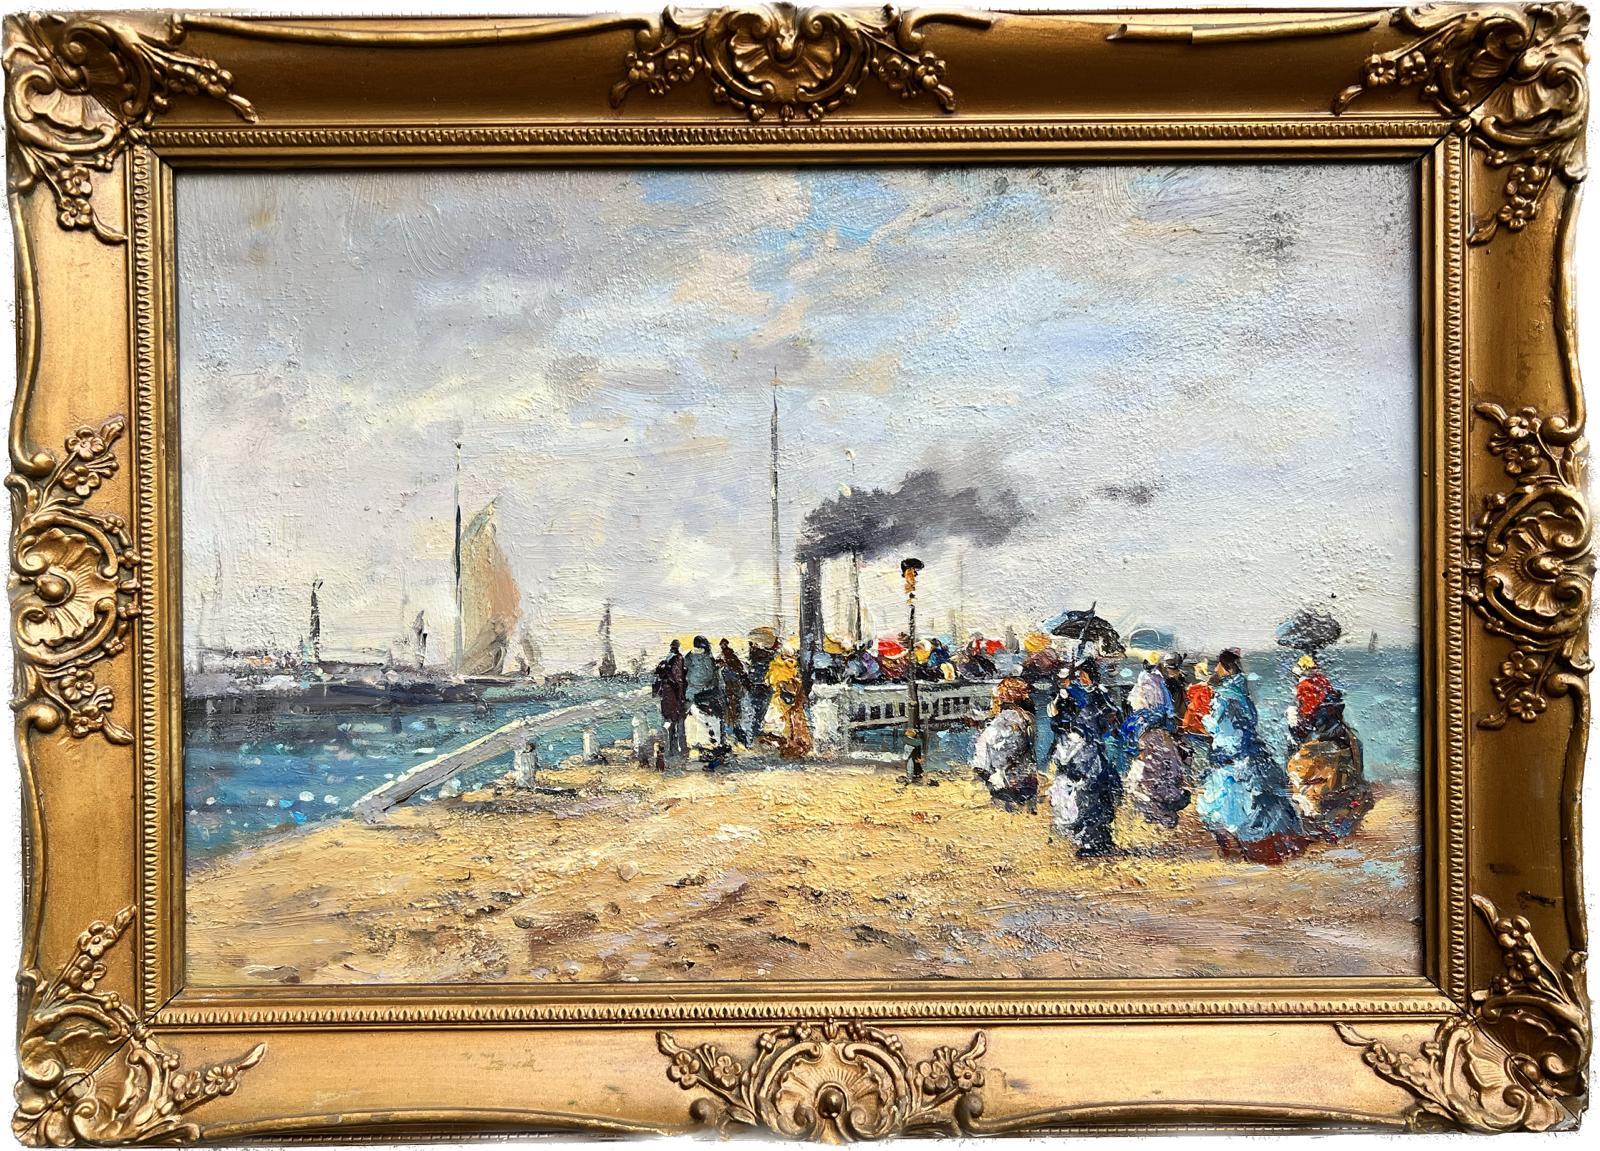 A Victorian Harbour Scene With Families Boarding A Steamship
French School, 20th century
oil painting on board, framed
framed: 13 x 18 inches
board: 9.5 x 14.75 inches
provenance: private collection, England
condition: very good and sound condition 
